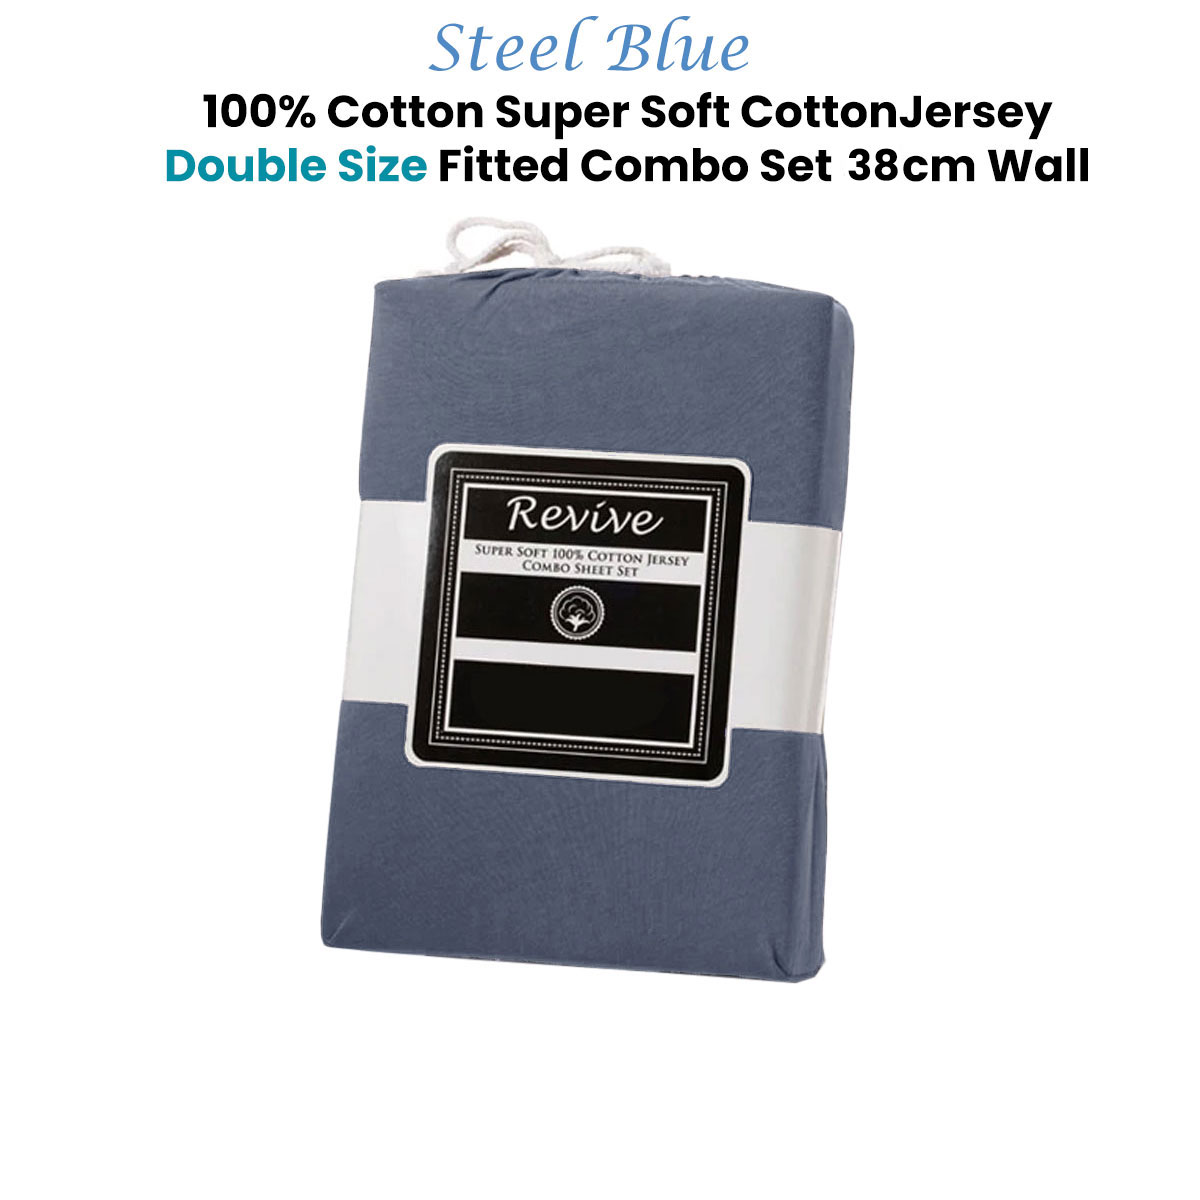 Steel Blue 100% Cotton Jersey Super Soft Fitted Sheet Combo Set Double 38cm Wall